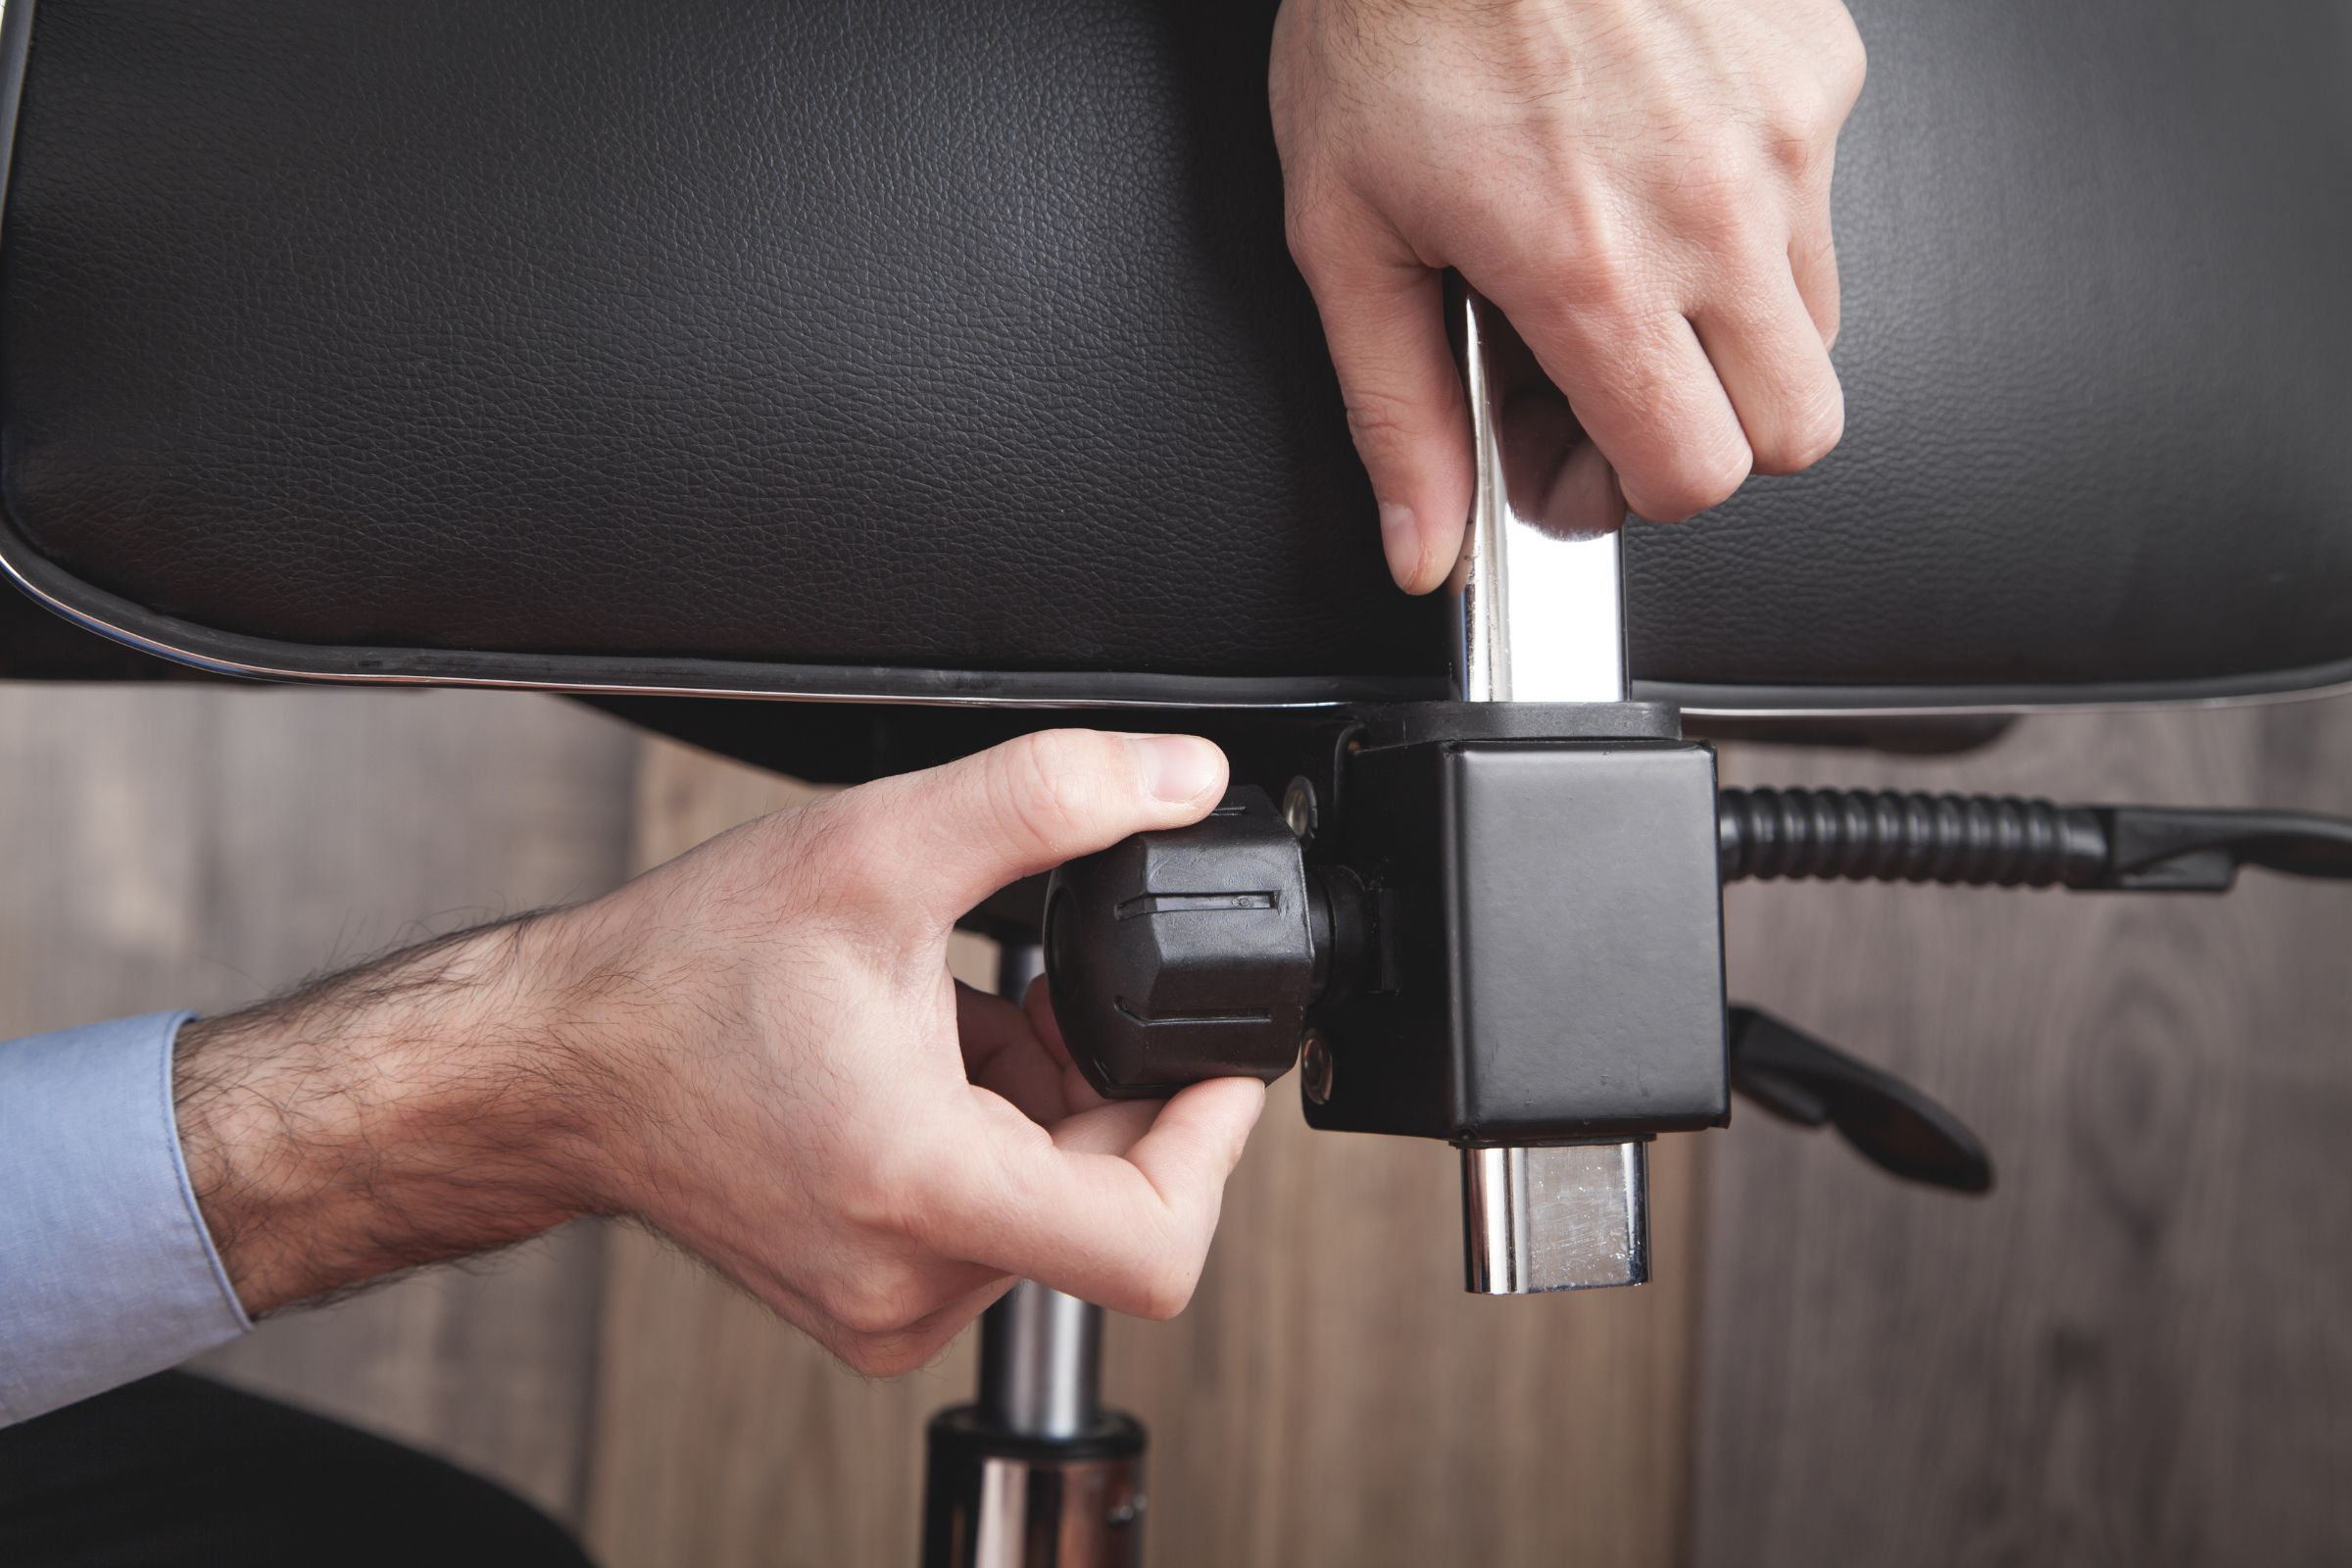 How to Set Up Your Ergonomic Chair: Tips for Proper Posture and Alignment